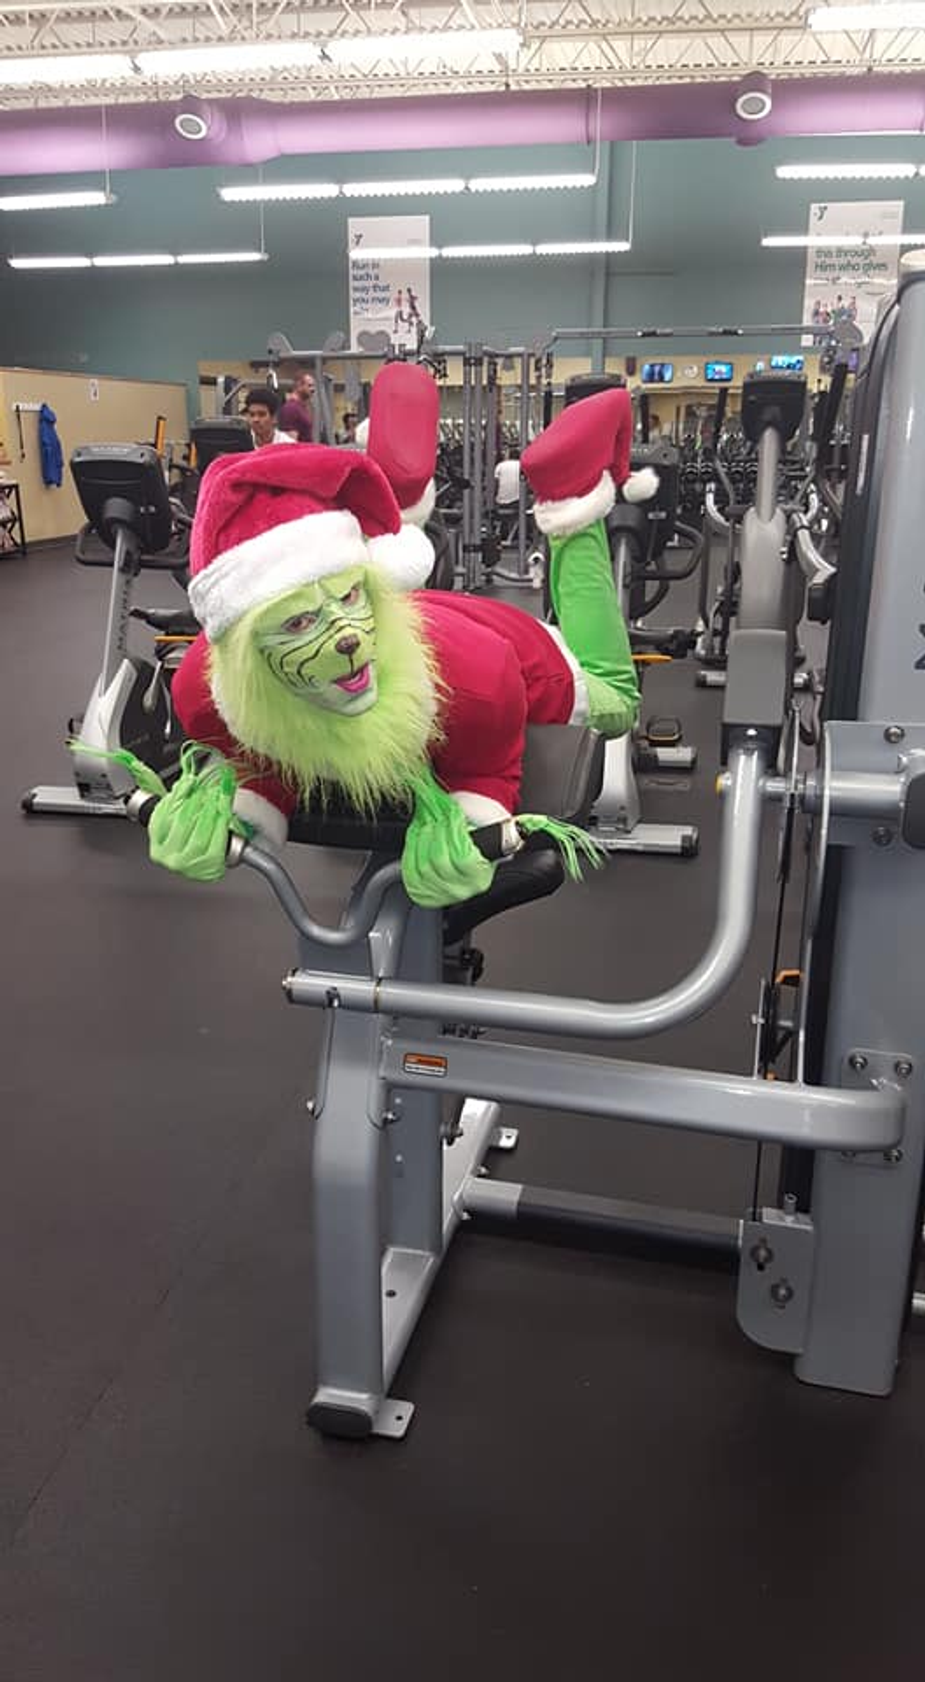 The Grinch is working out to get ready for the Shawnee Family YMCA's Supper with Santa and The Grinch. Photo by Brandon Bell.